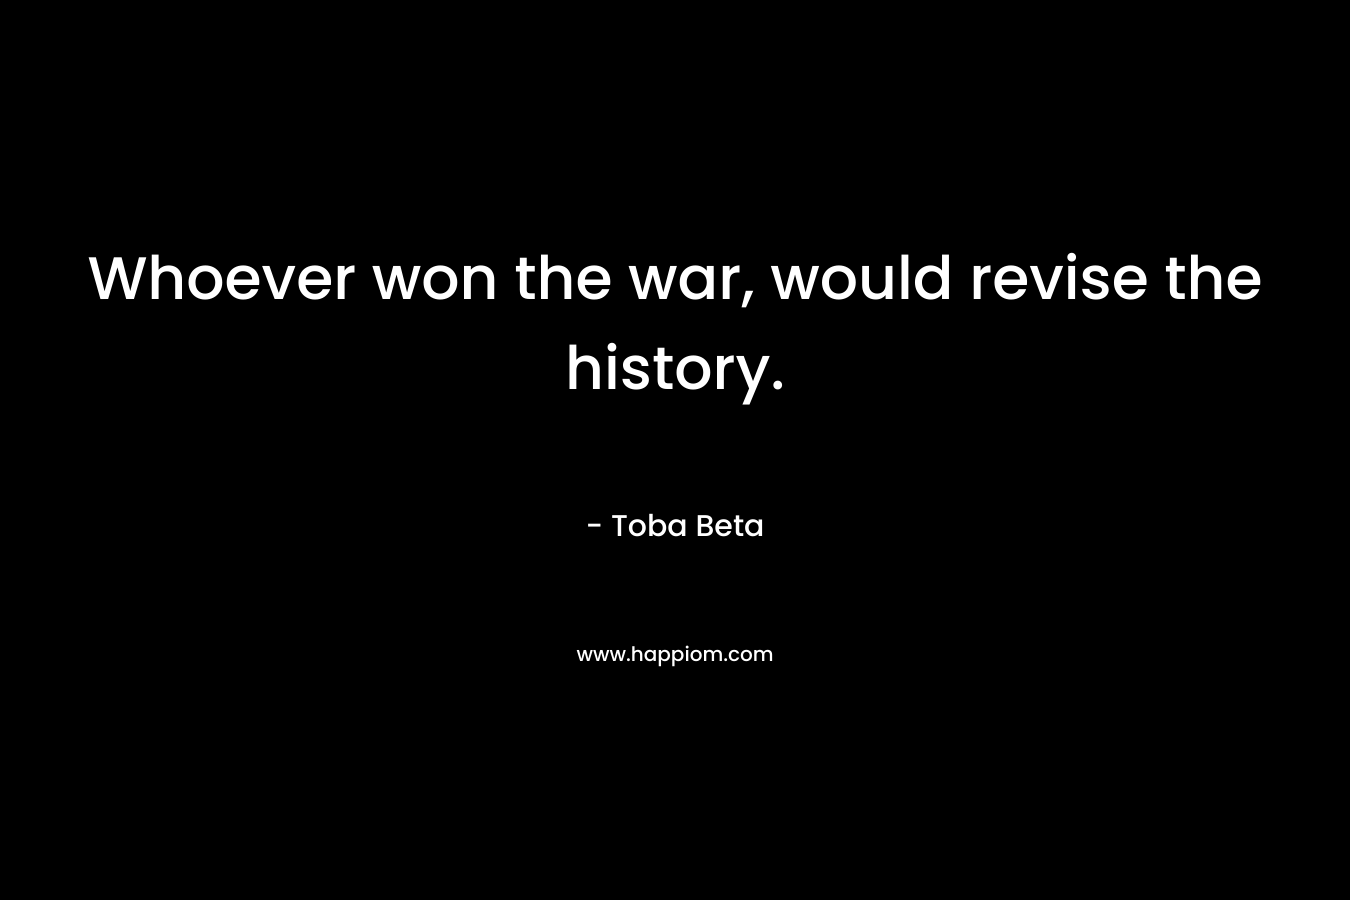 Whoever won the war, would revise the history. – Toba Beta